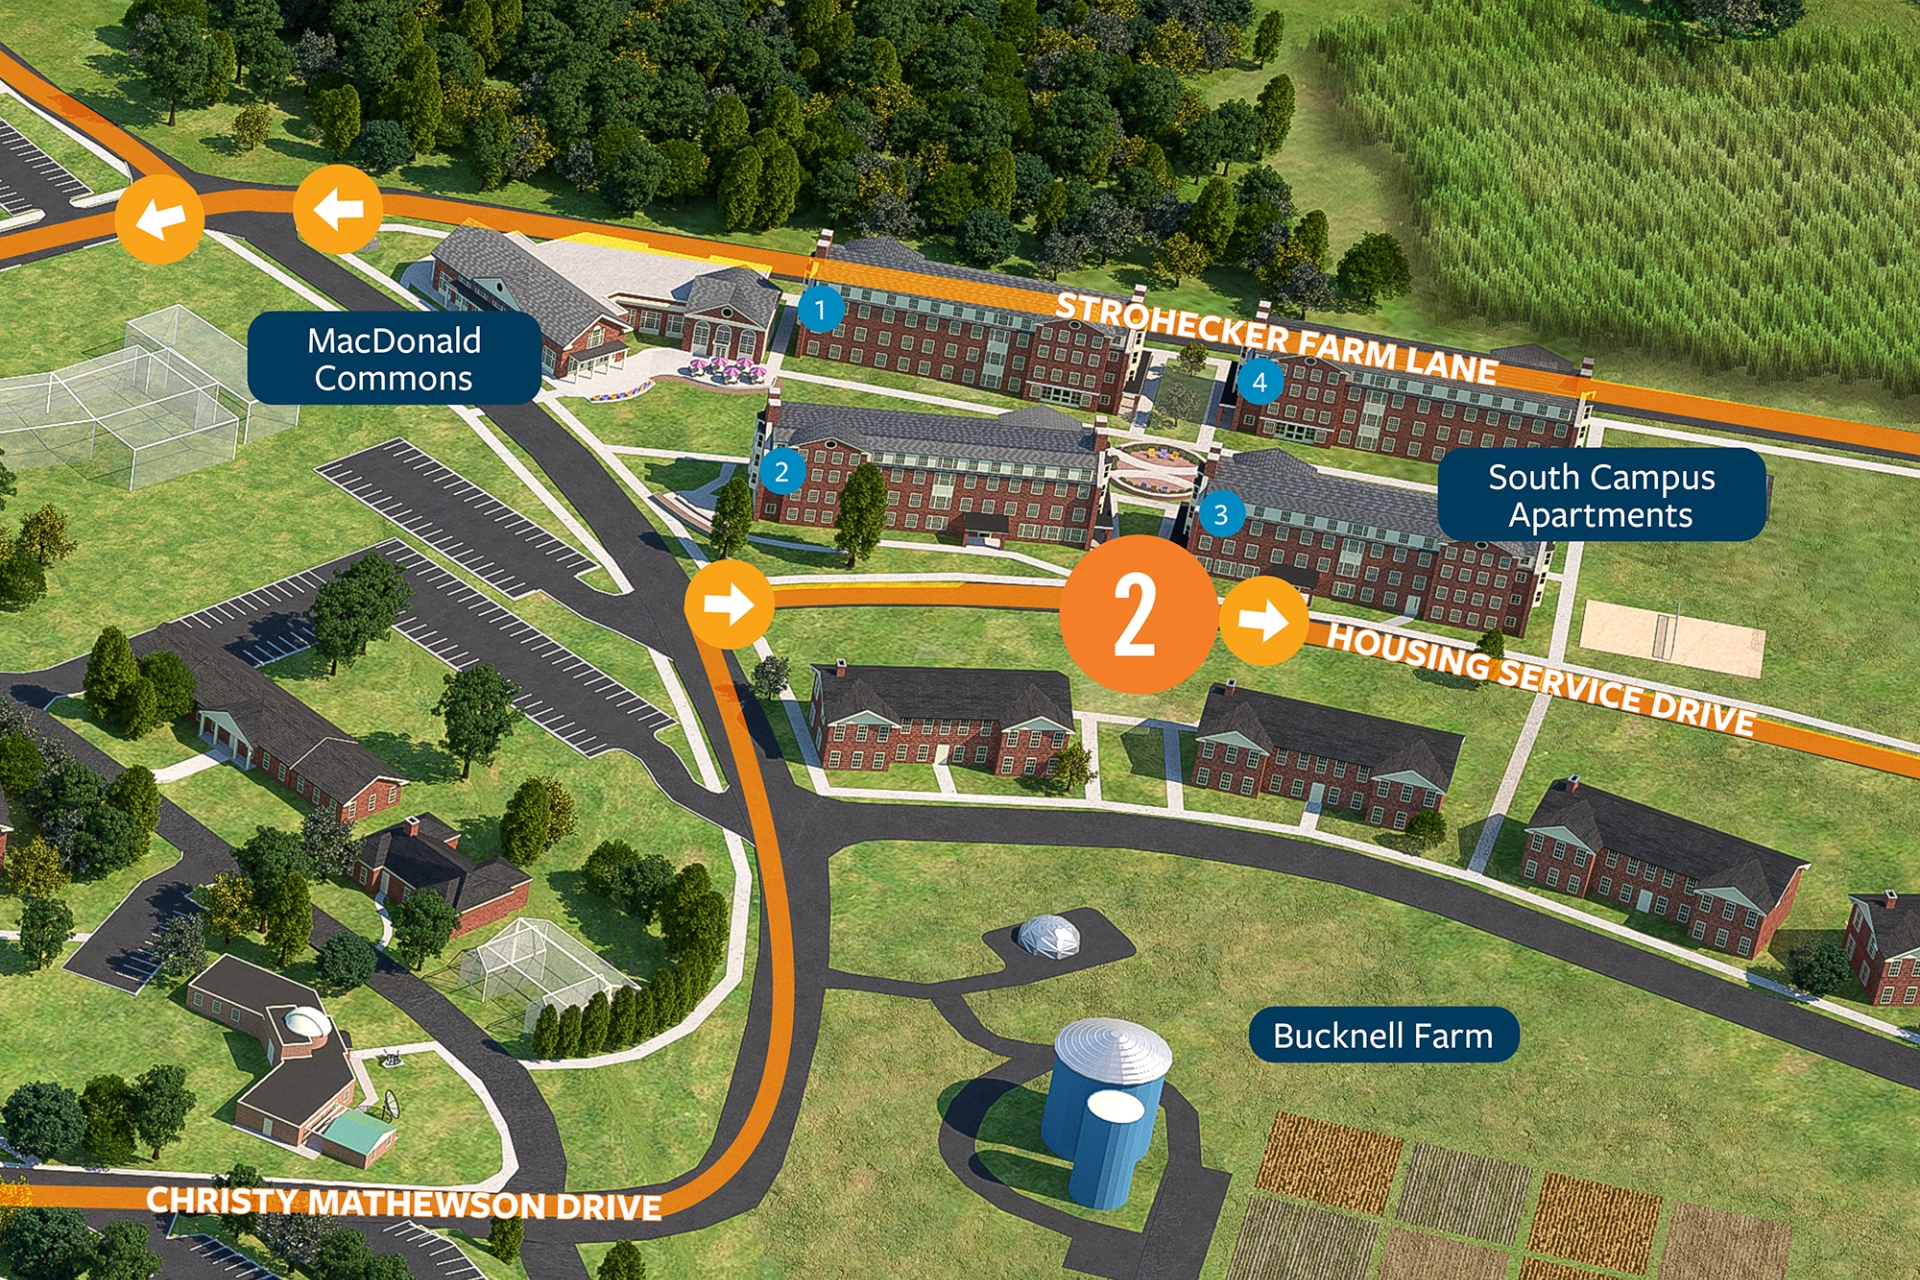 A 3D map showing Bucknell Farm, South Campus Apartments, and MacDonald Commons on the Bucknell Campus.